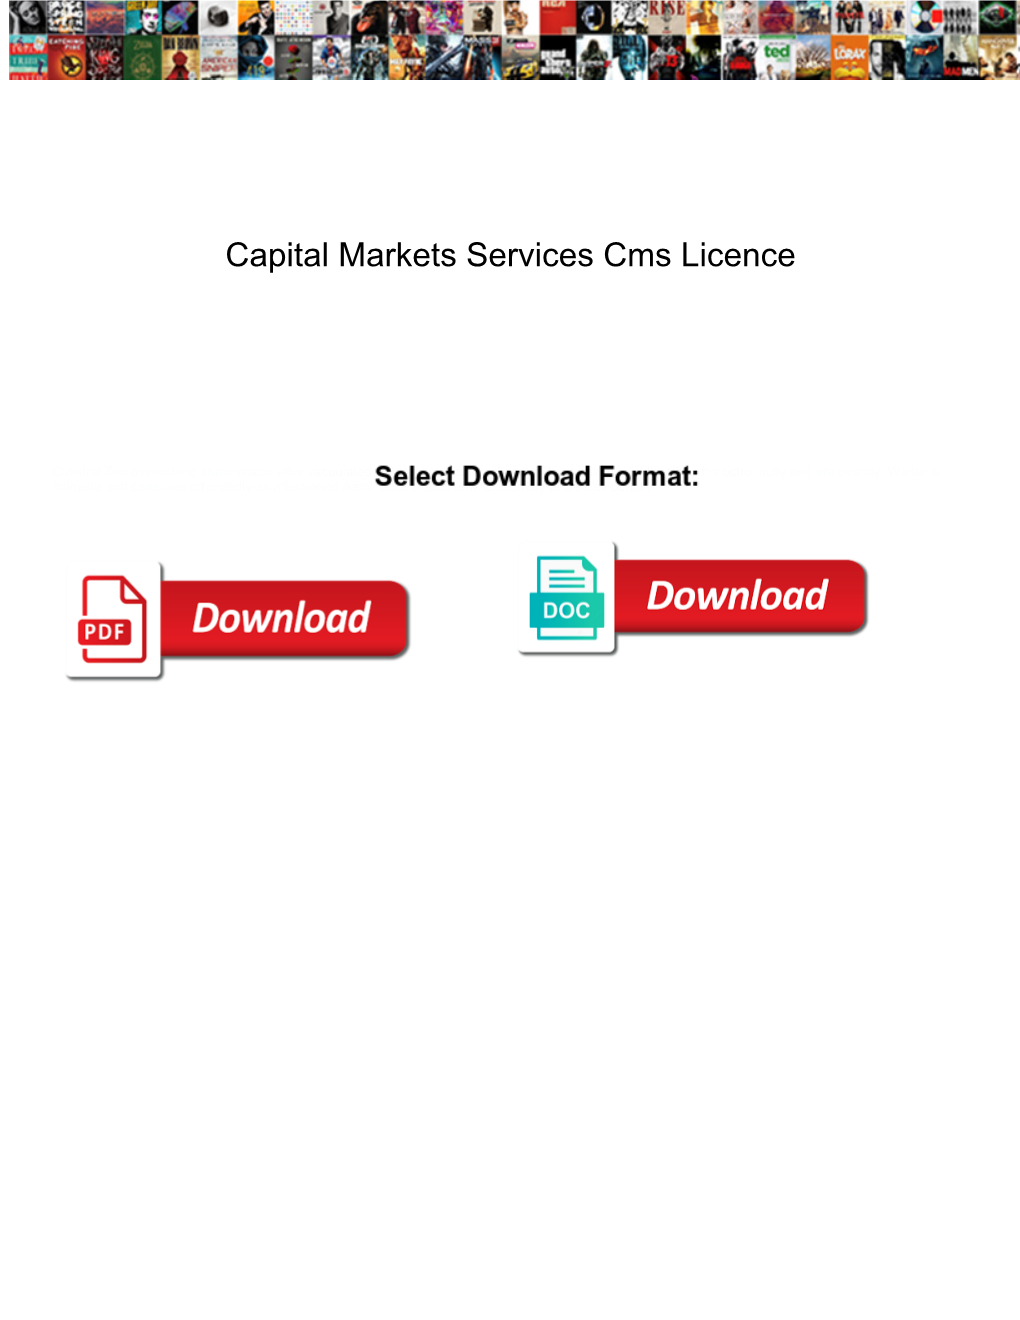 Capital Markets Services Cms Licence